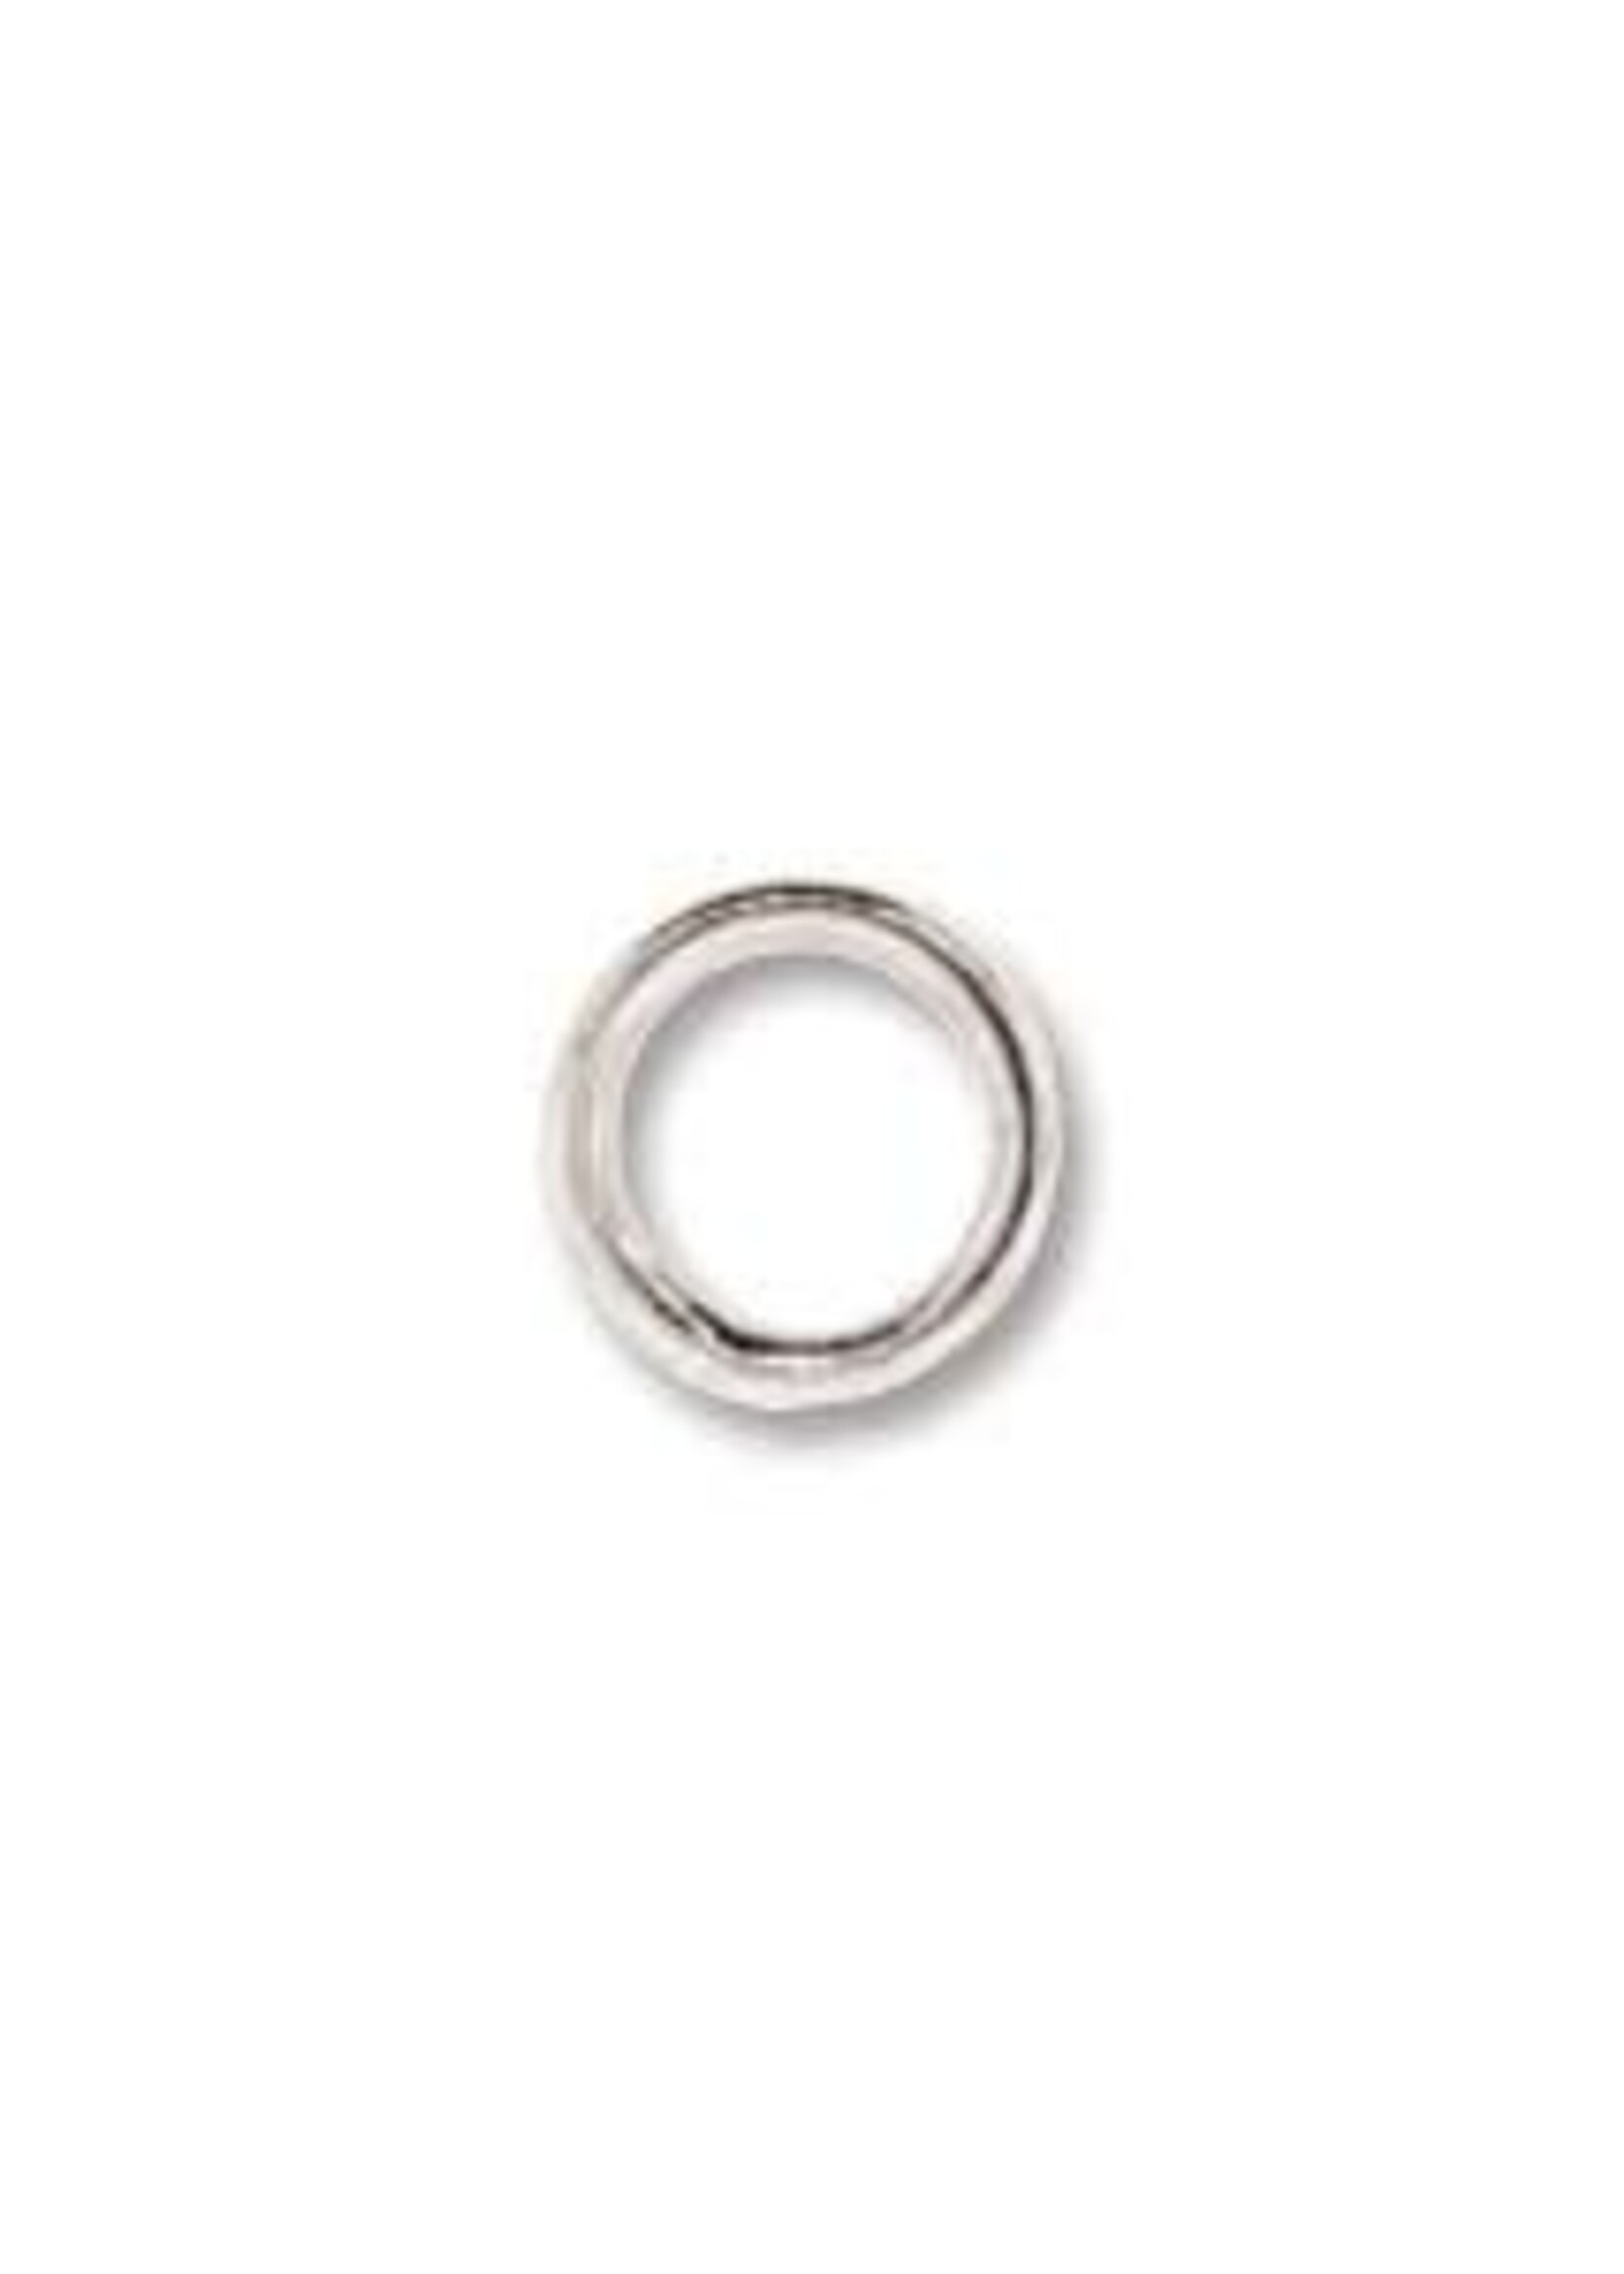 6mm Closed Rings, 19ga, Silver Plate Qty 12